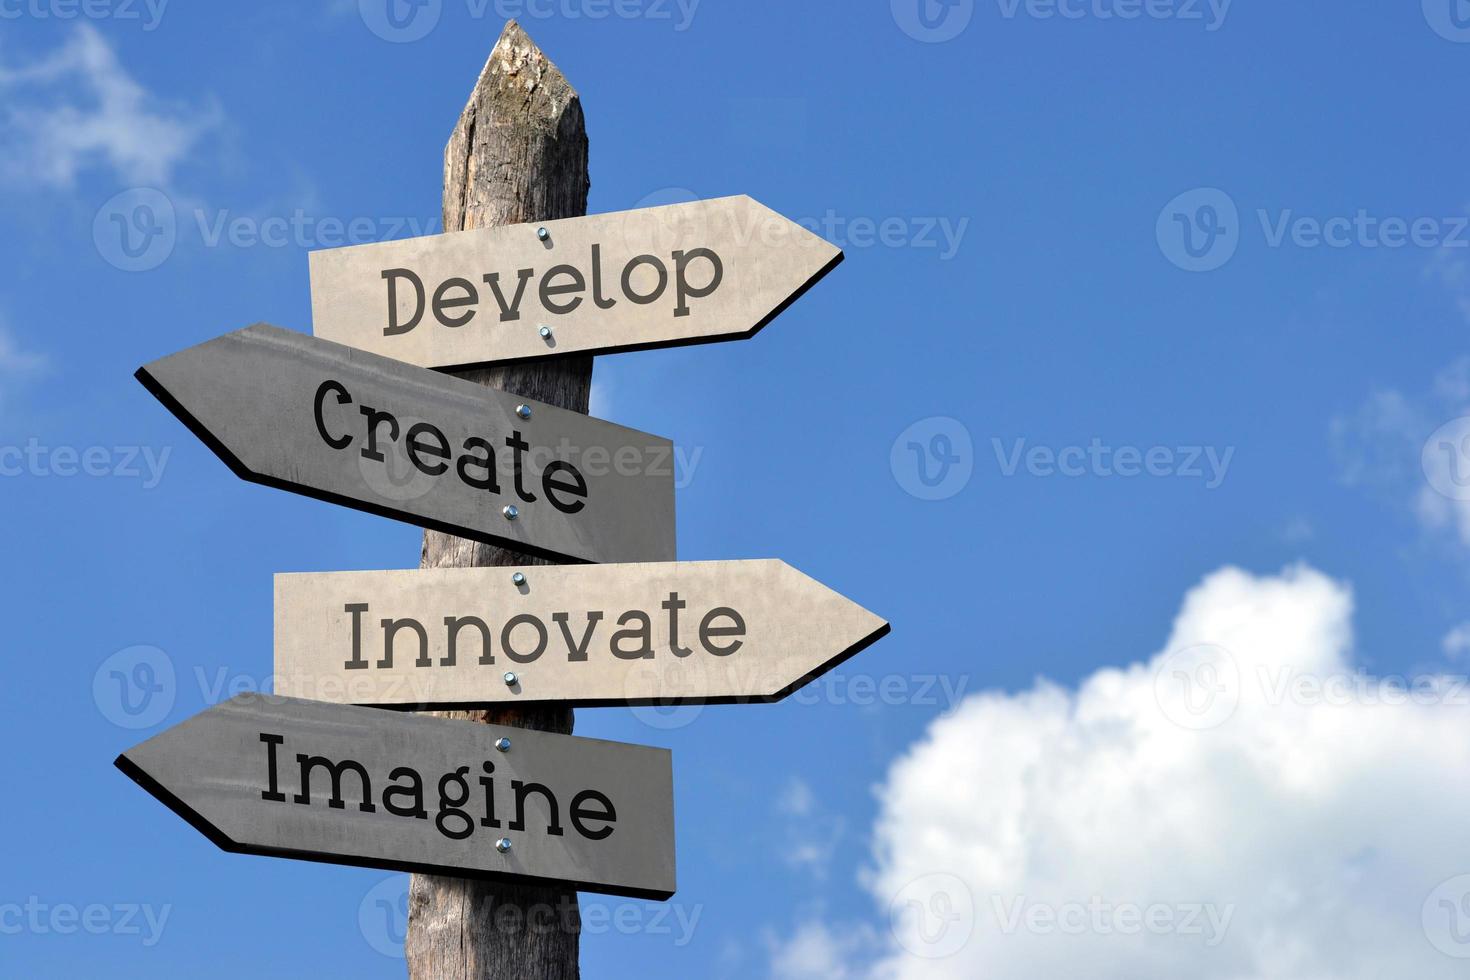 Develop, Create, innovate, Imagine - Wooden Signpost with Four Arrows, Sky with Clouds photo